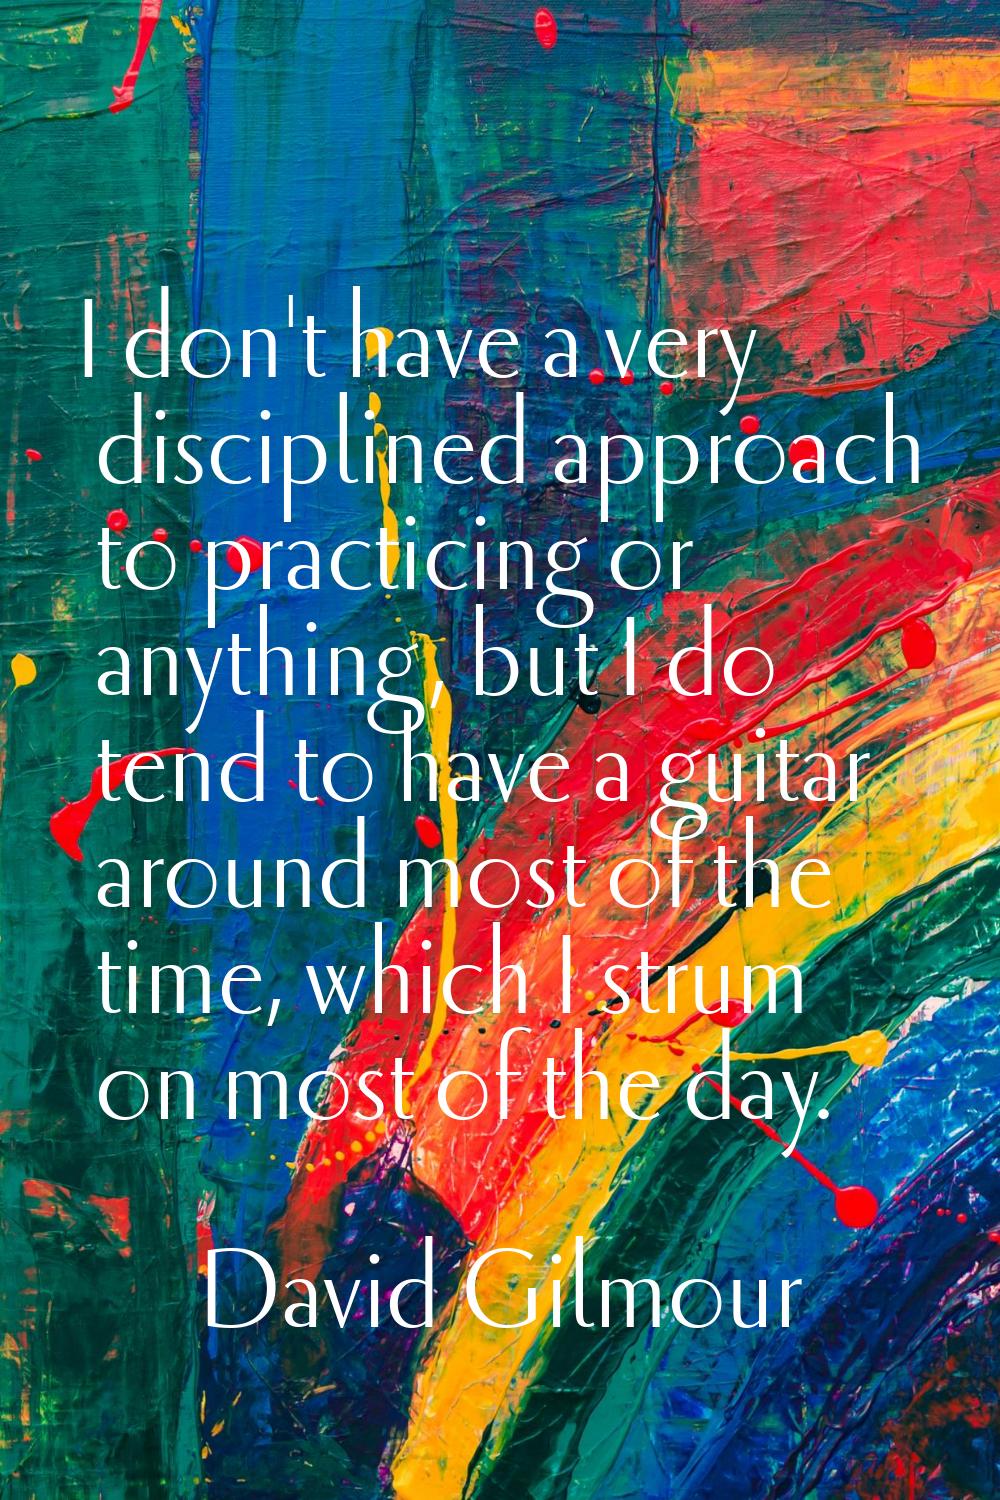 I don't have a very disciplined approach to practicing or anything, but I do tend to have a guitar 